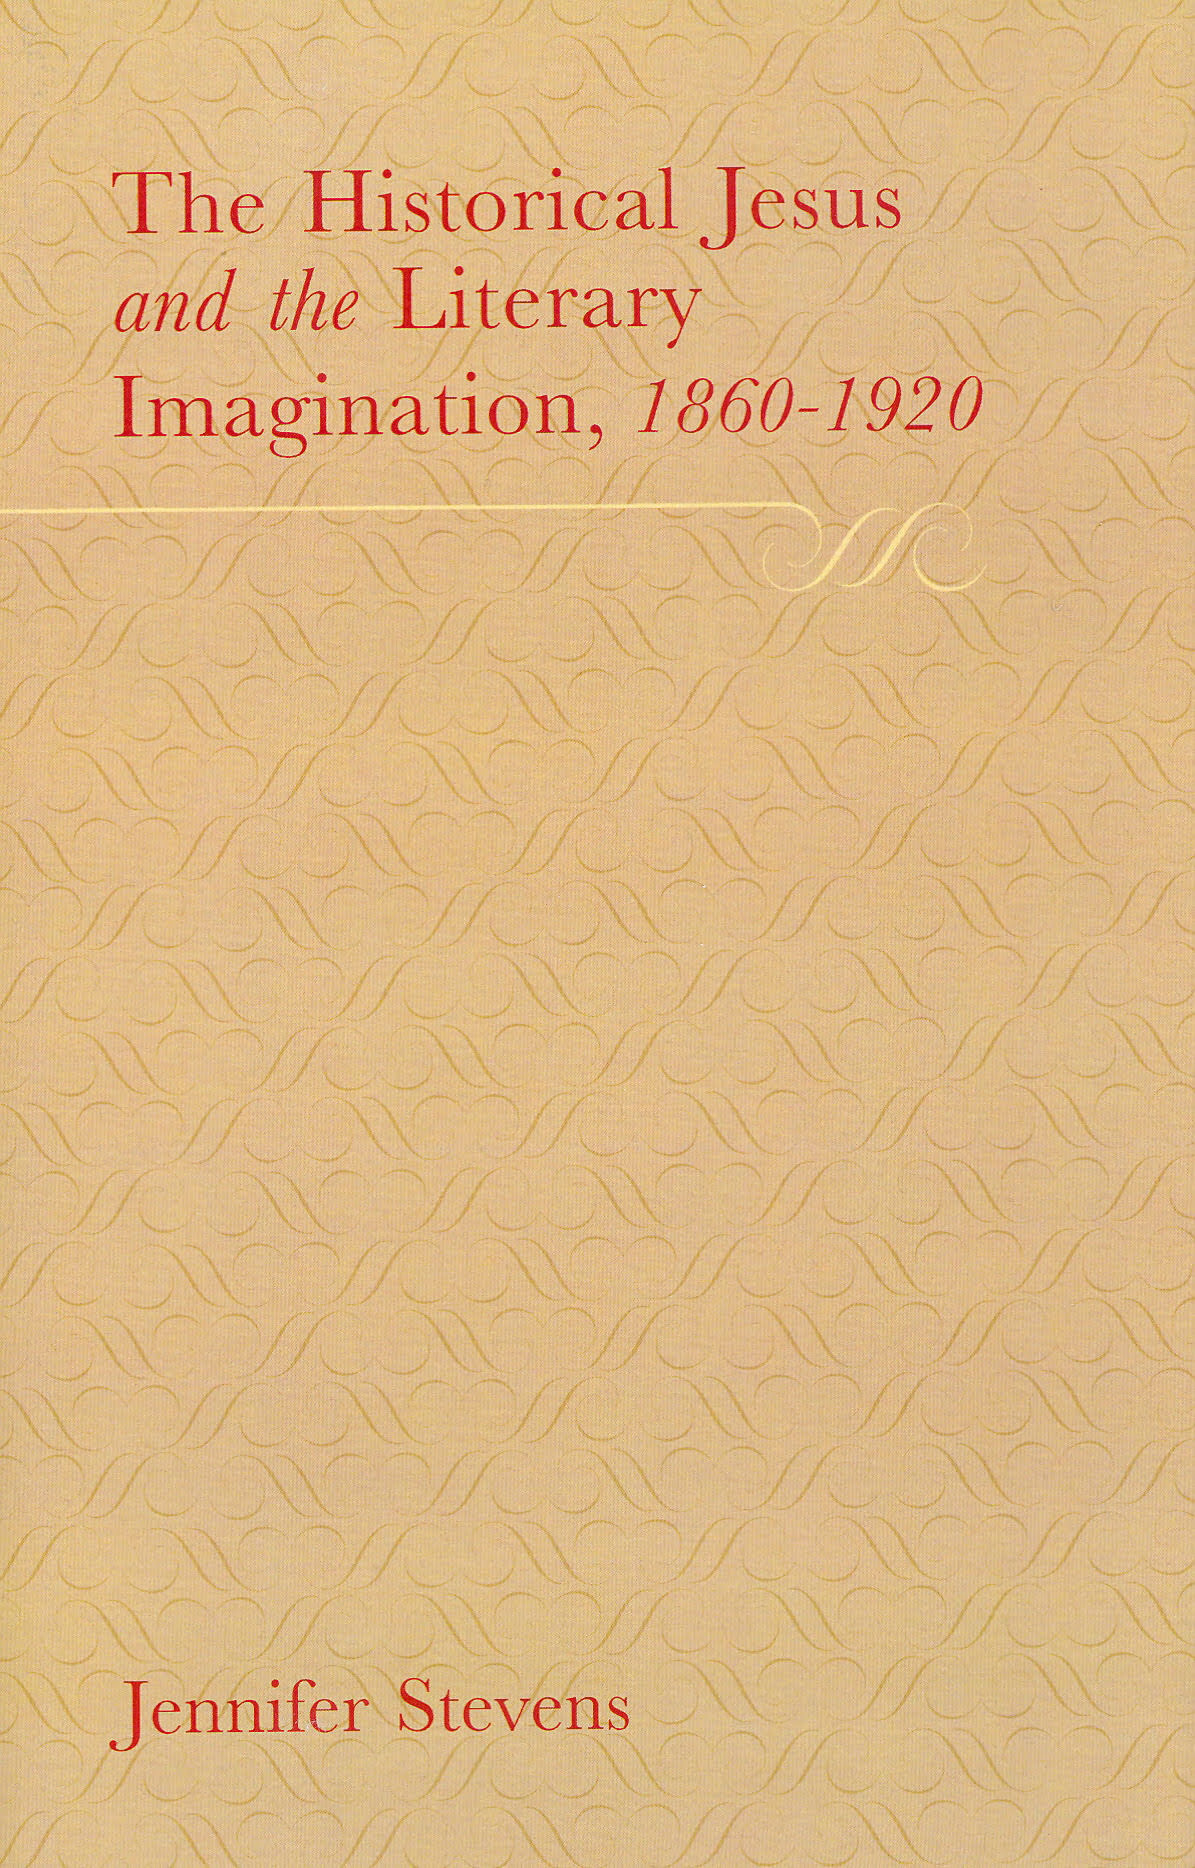 The Historical Jesus and the Literary Imagination, 1860-1920